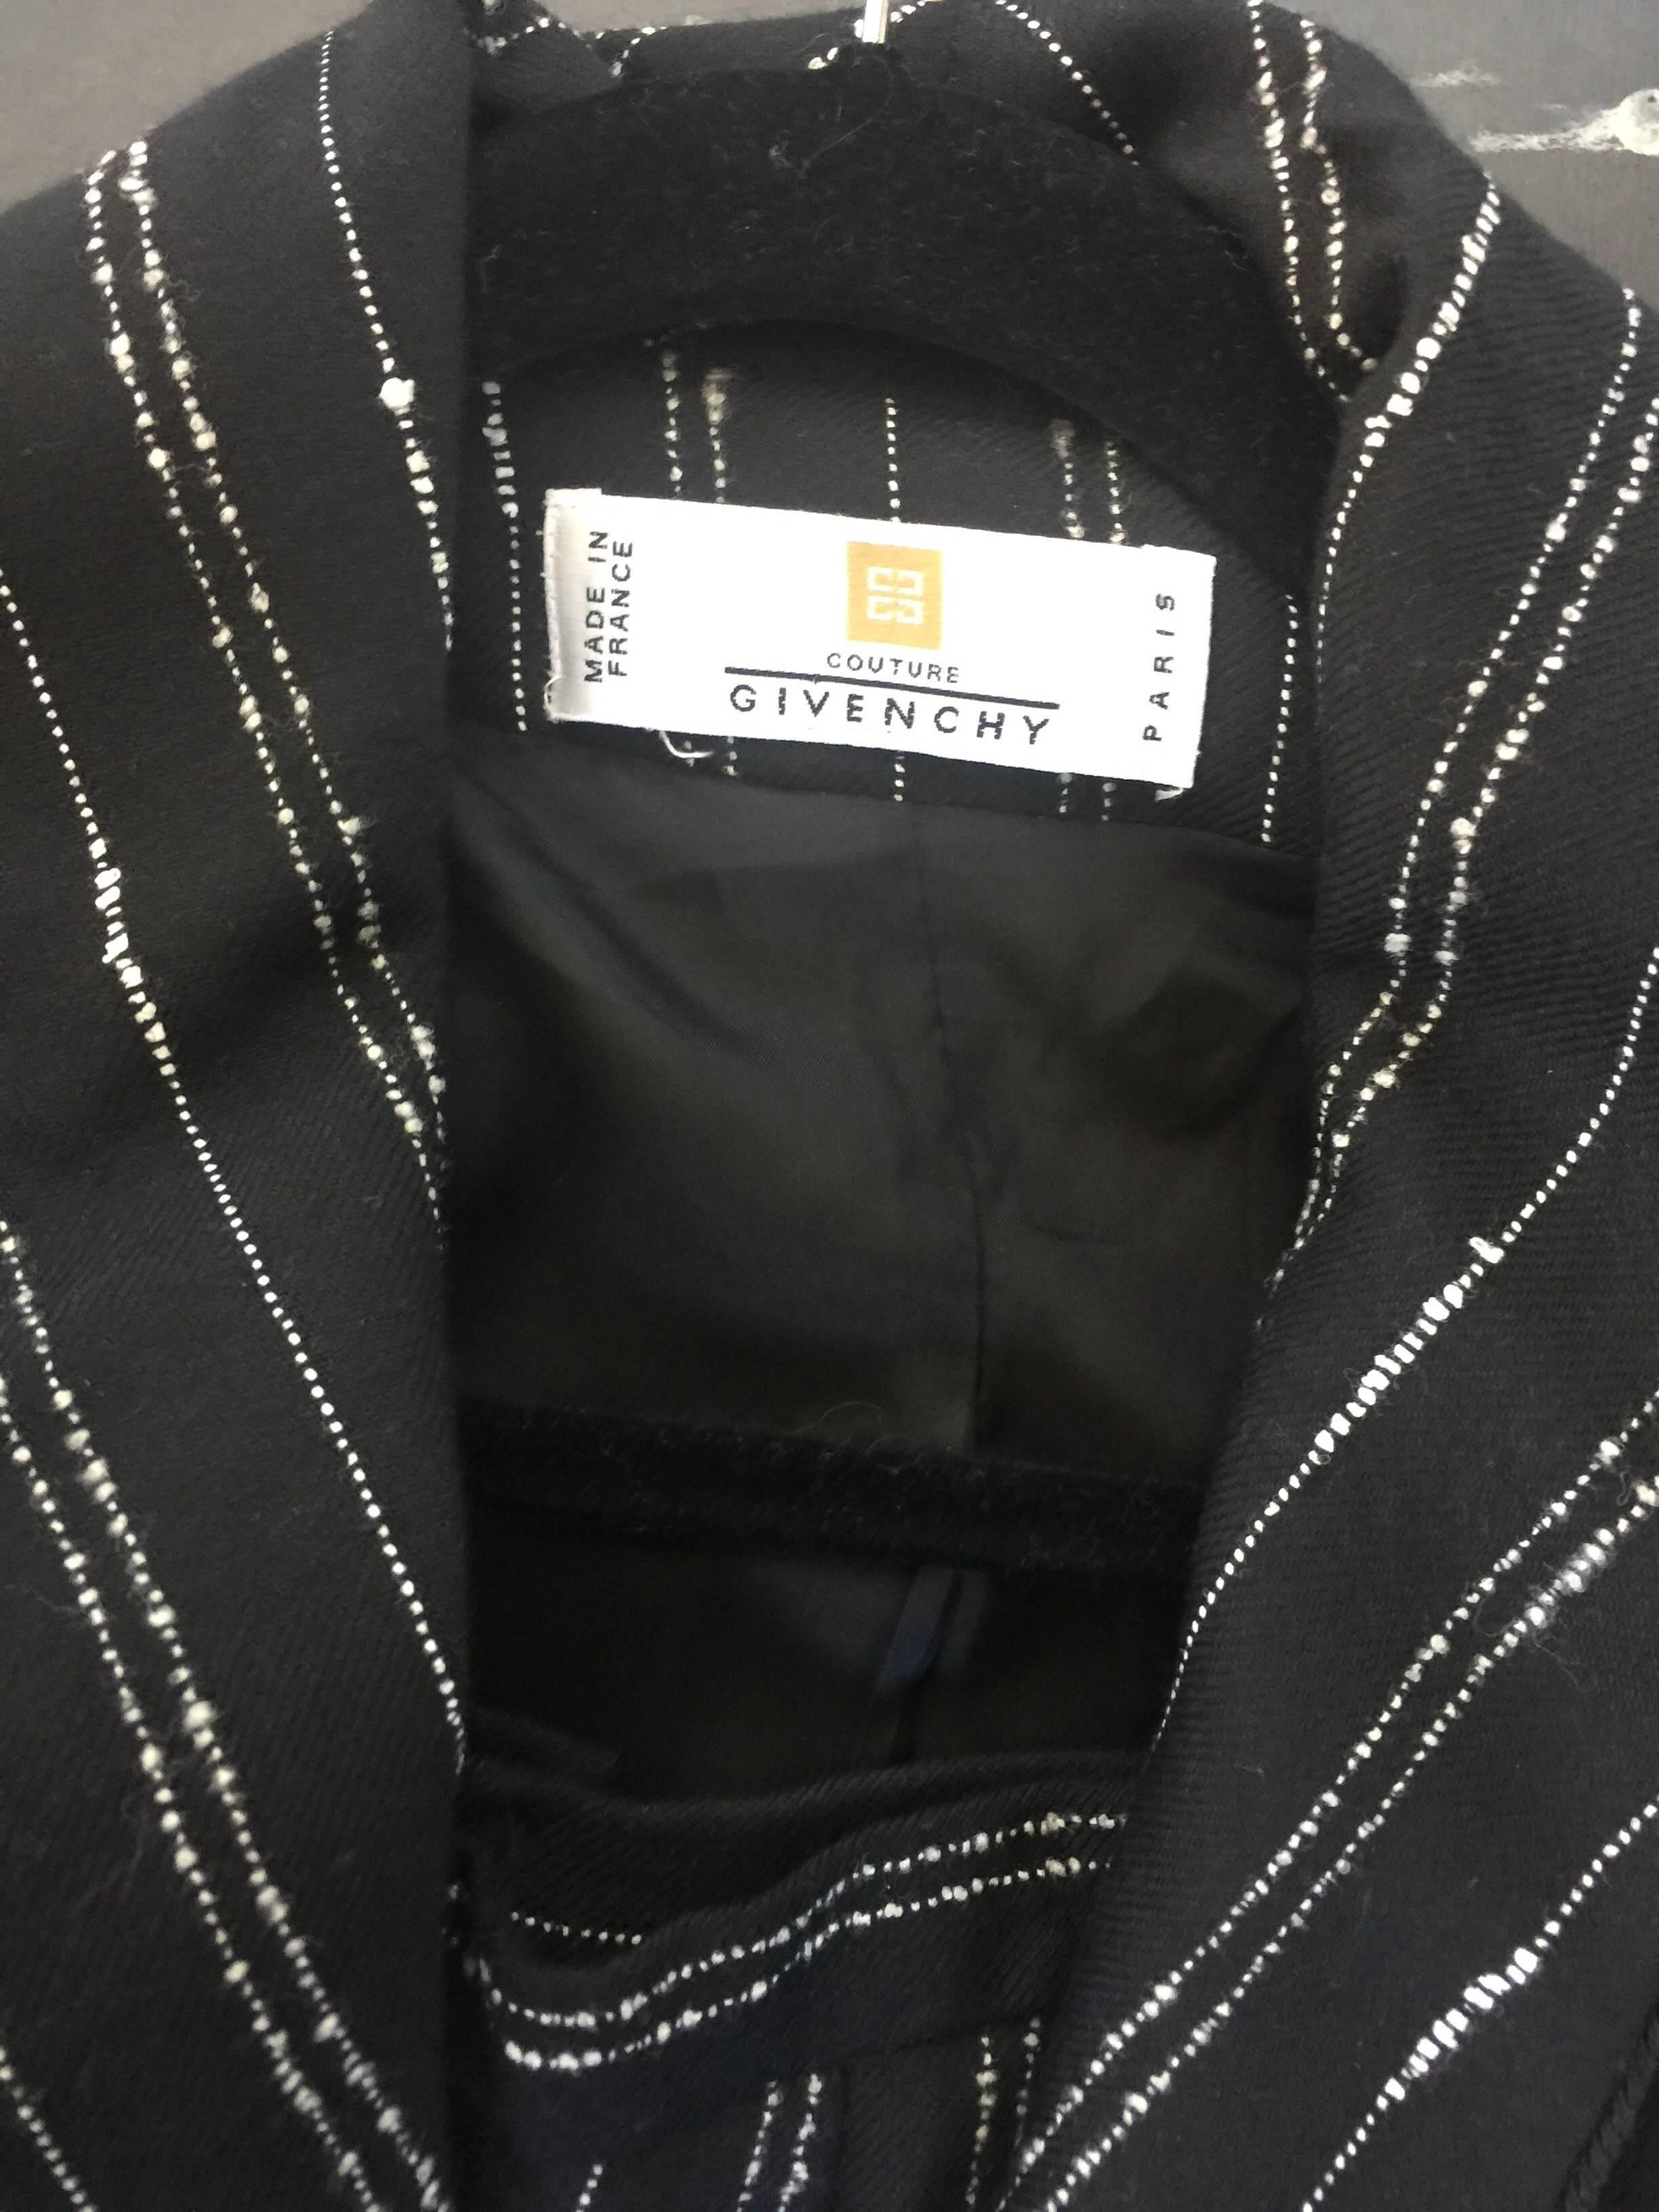 Givenchy black and white pinstripe skirt suit For Sale 3